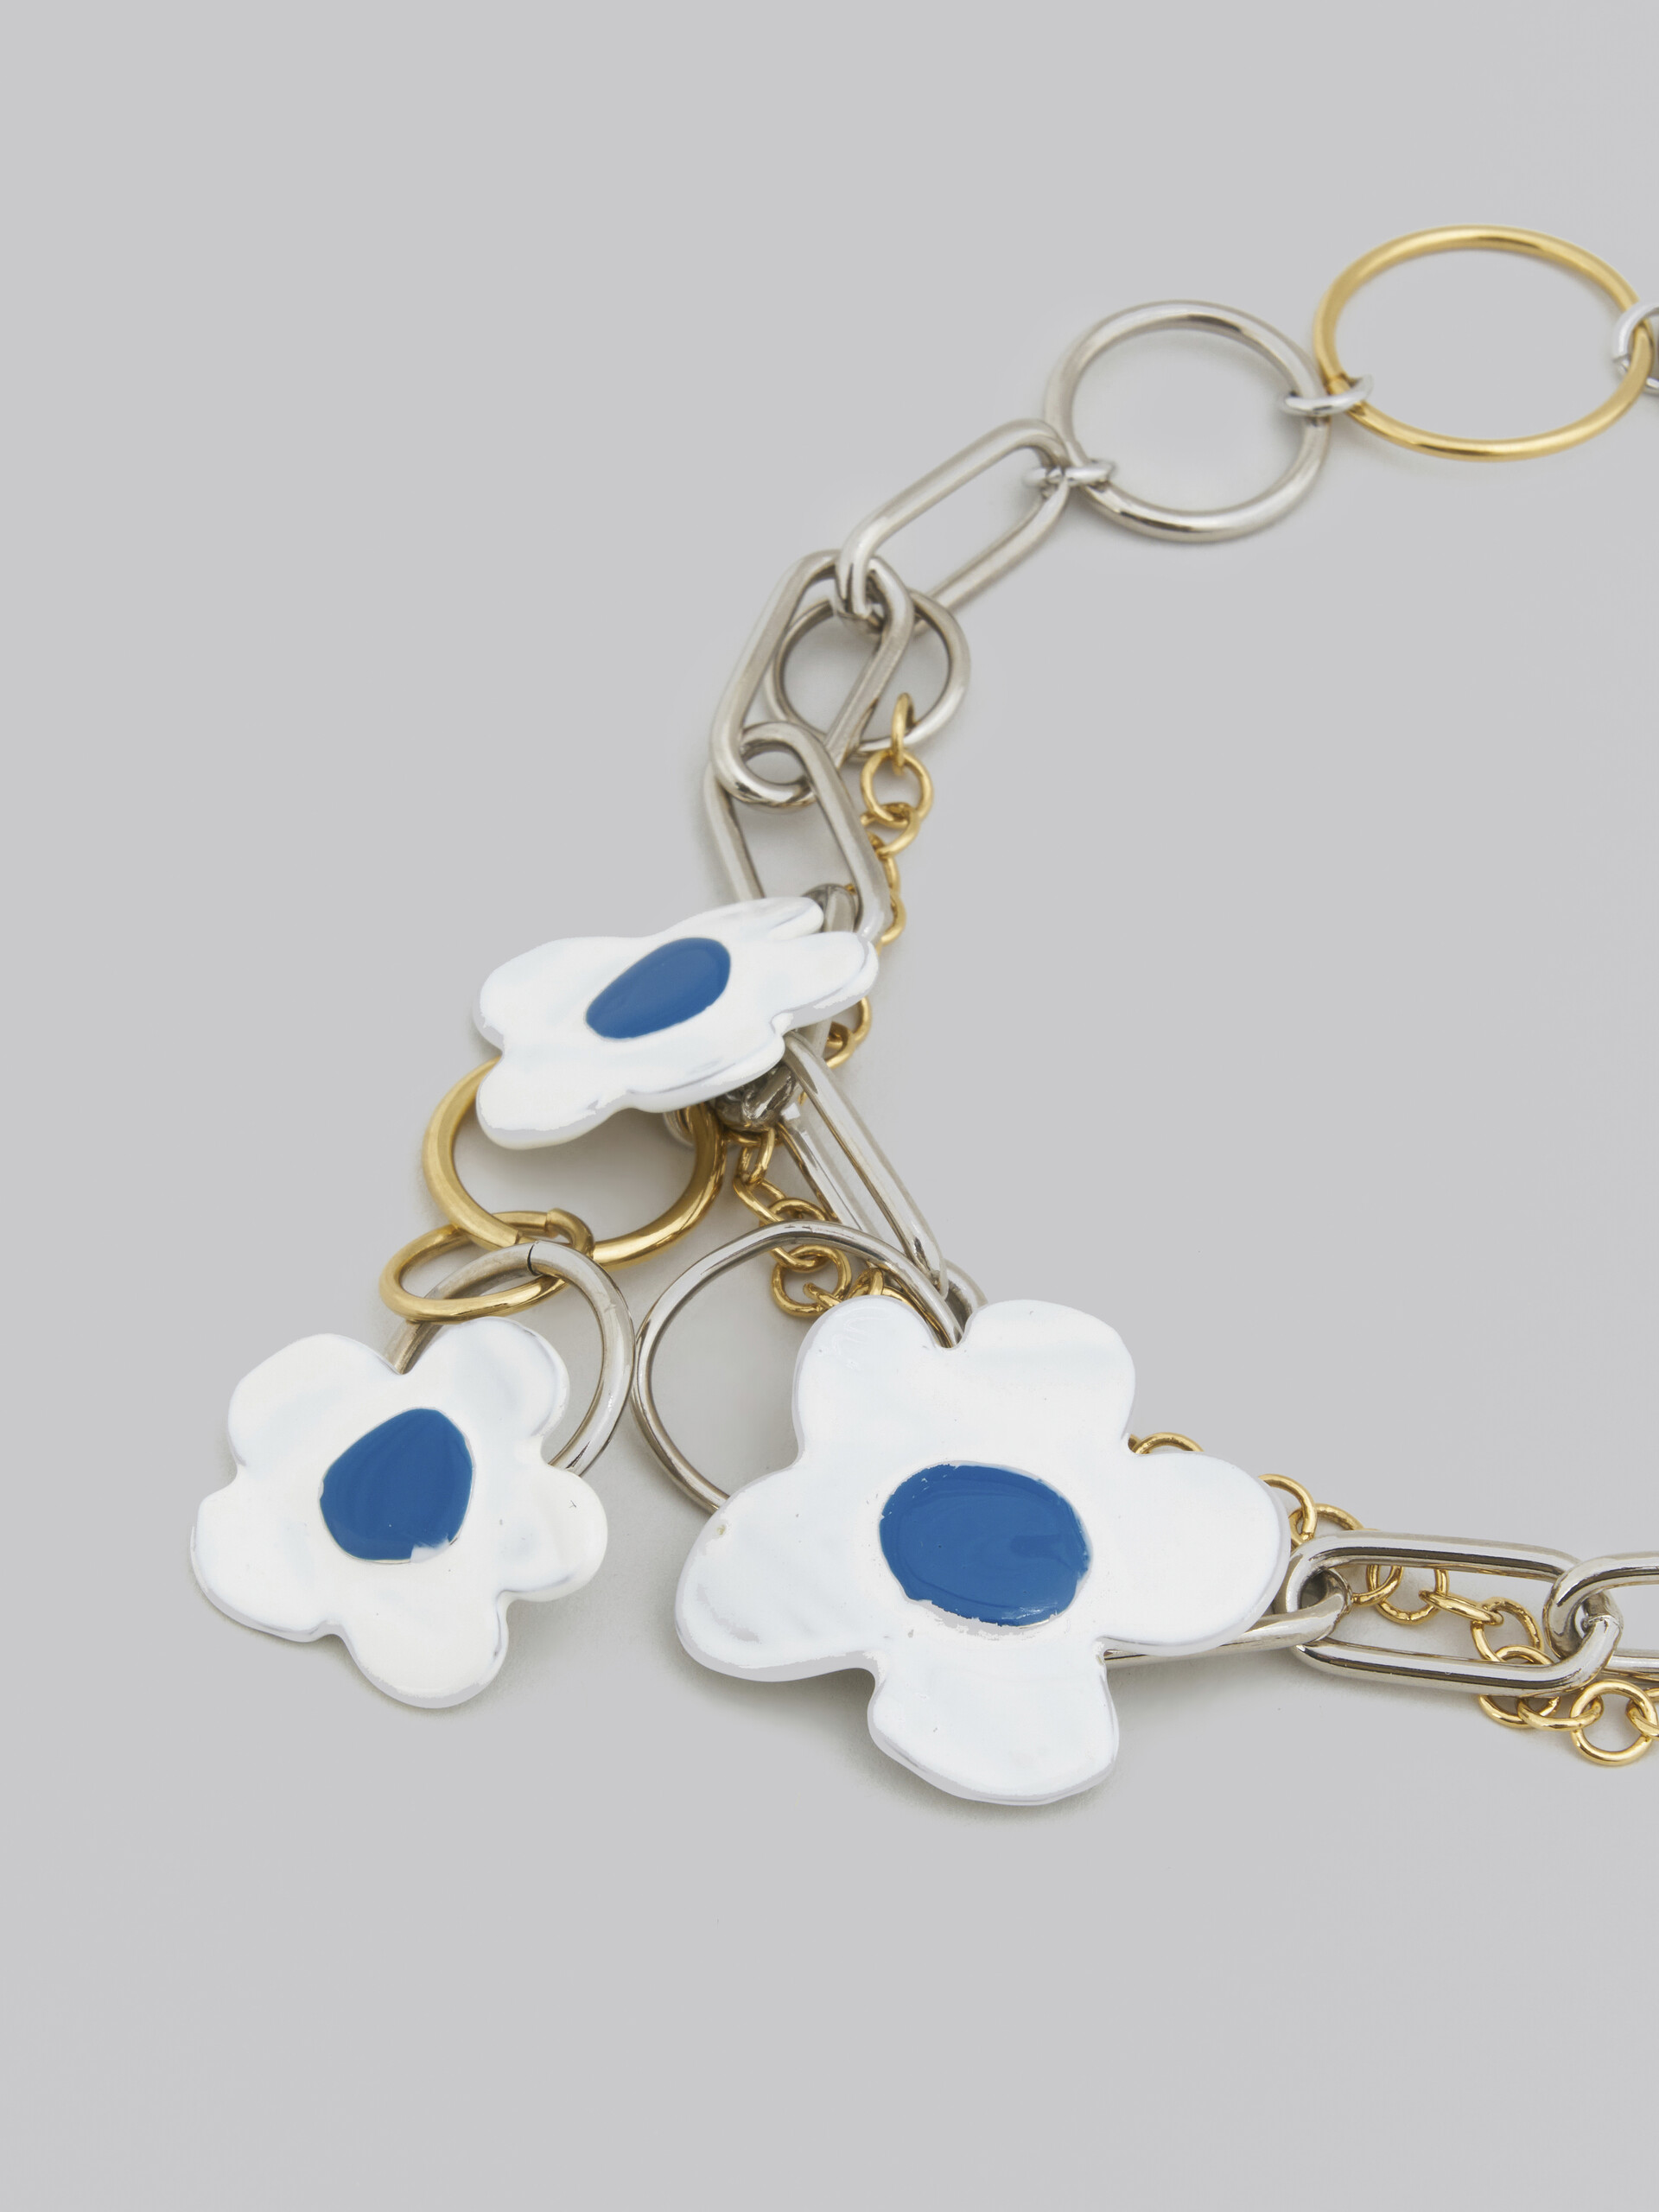 Necklace with white flowers - Necklaces - Image 3